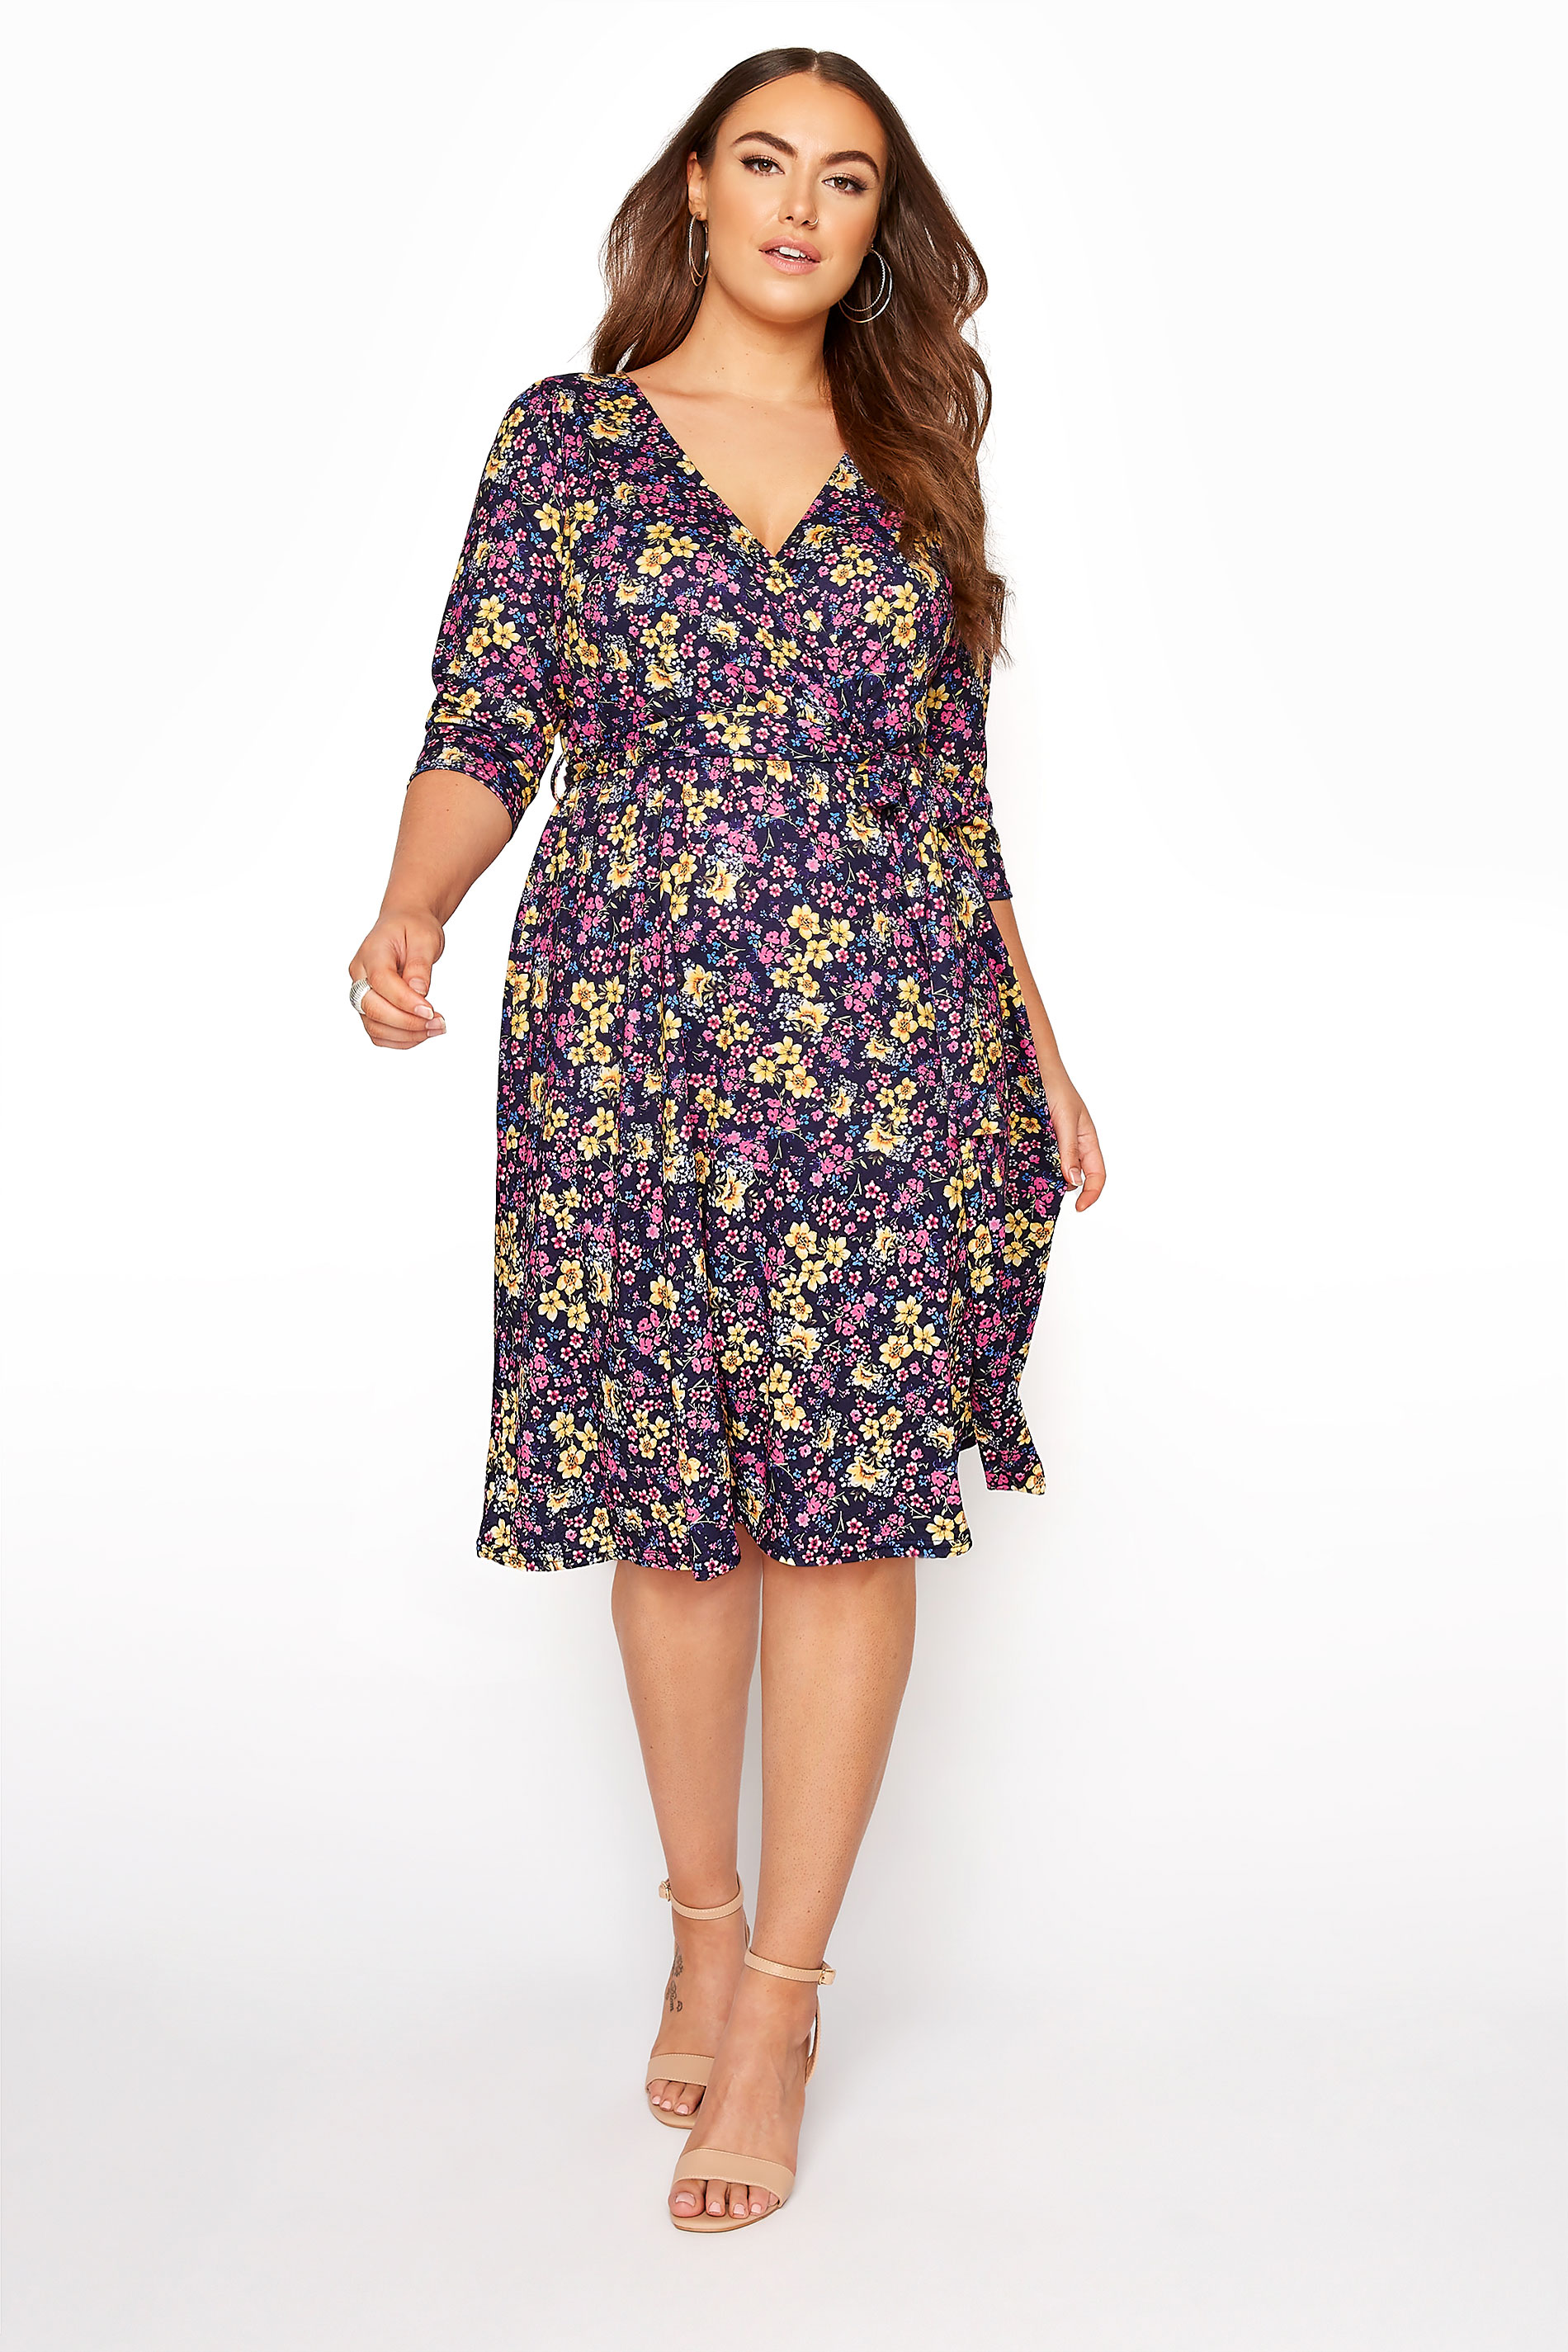 Robes Grande Taille Grande taille  Robes en Jersey | YOURS LONDON - Robe Bleue Marine Floral Midi - BN92299